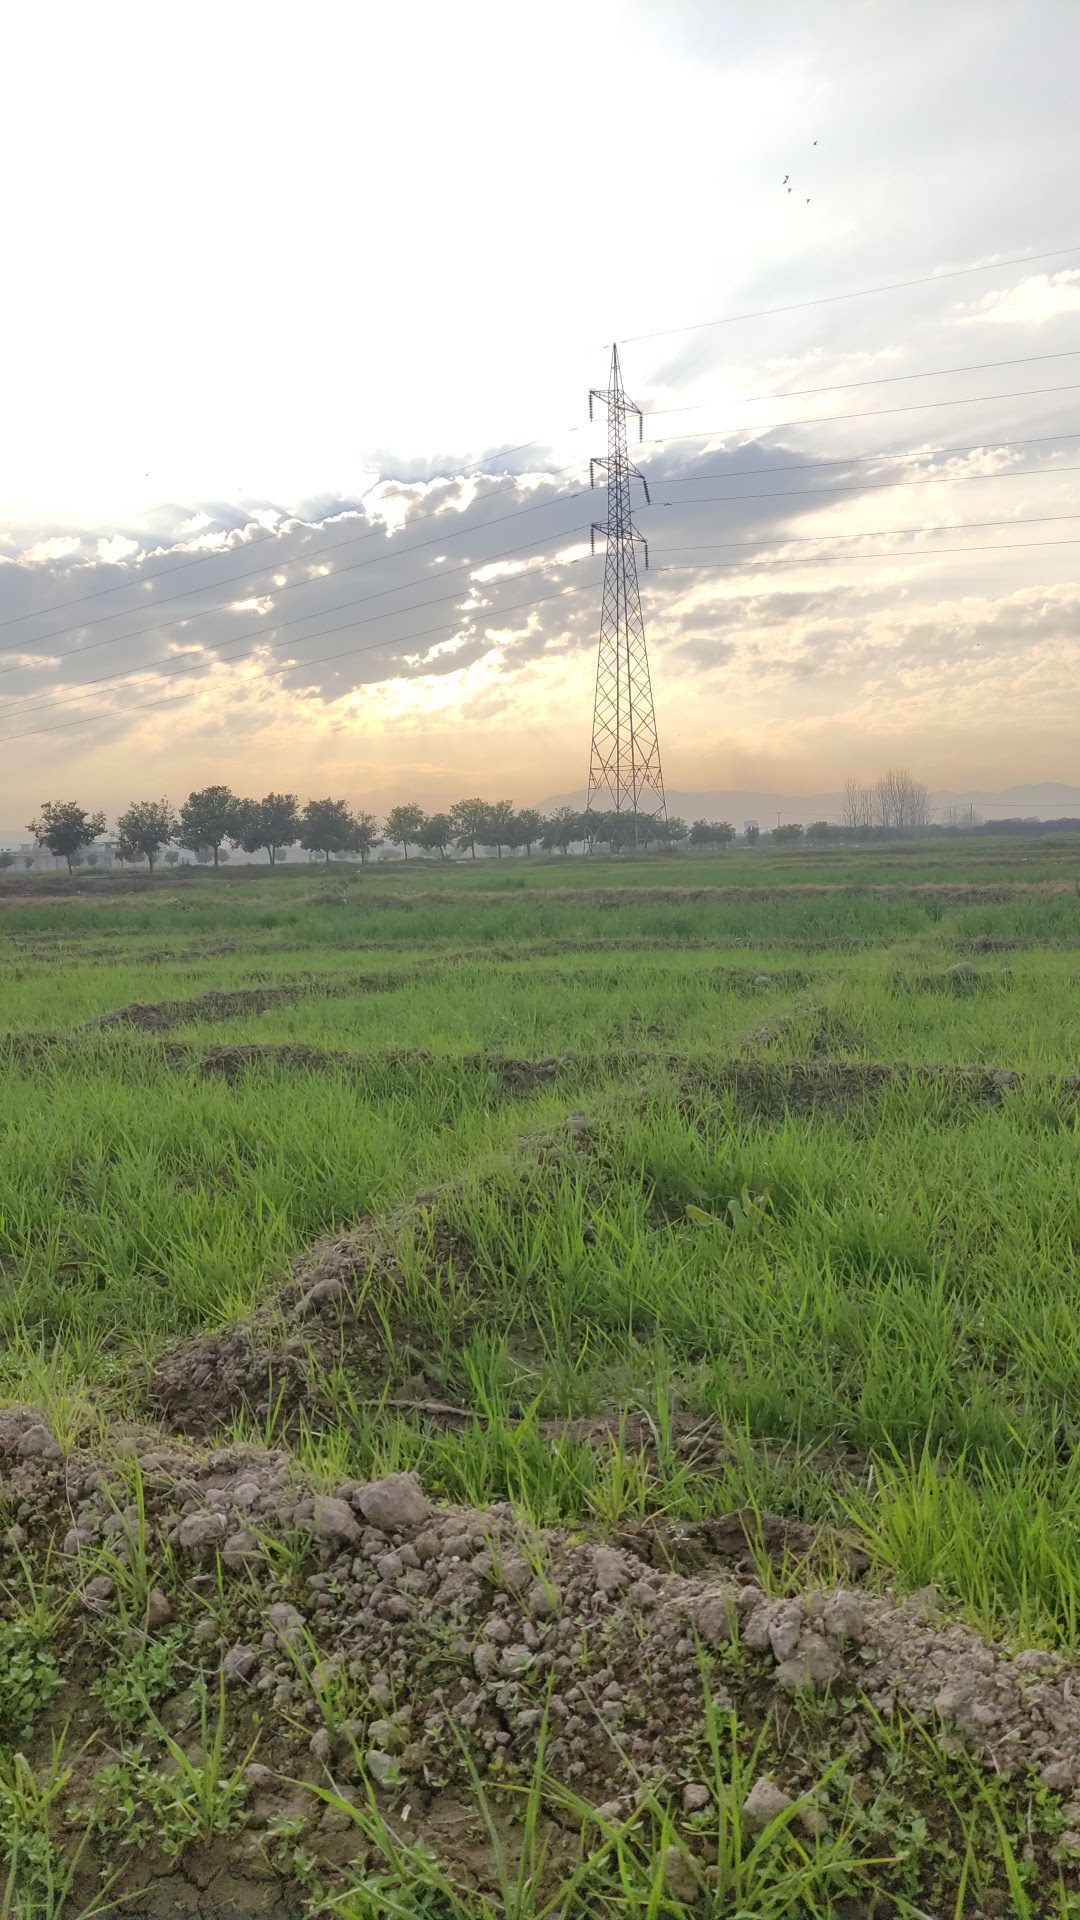 Agriculture University Fields and Farms, Peshawar